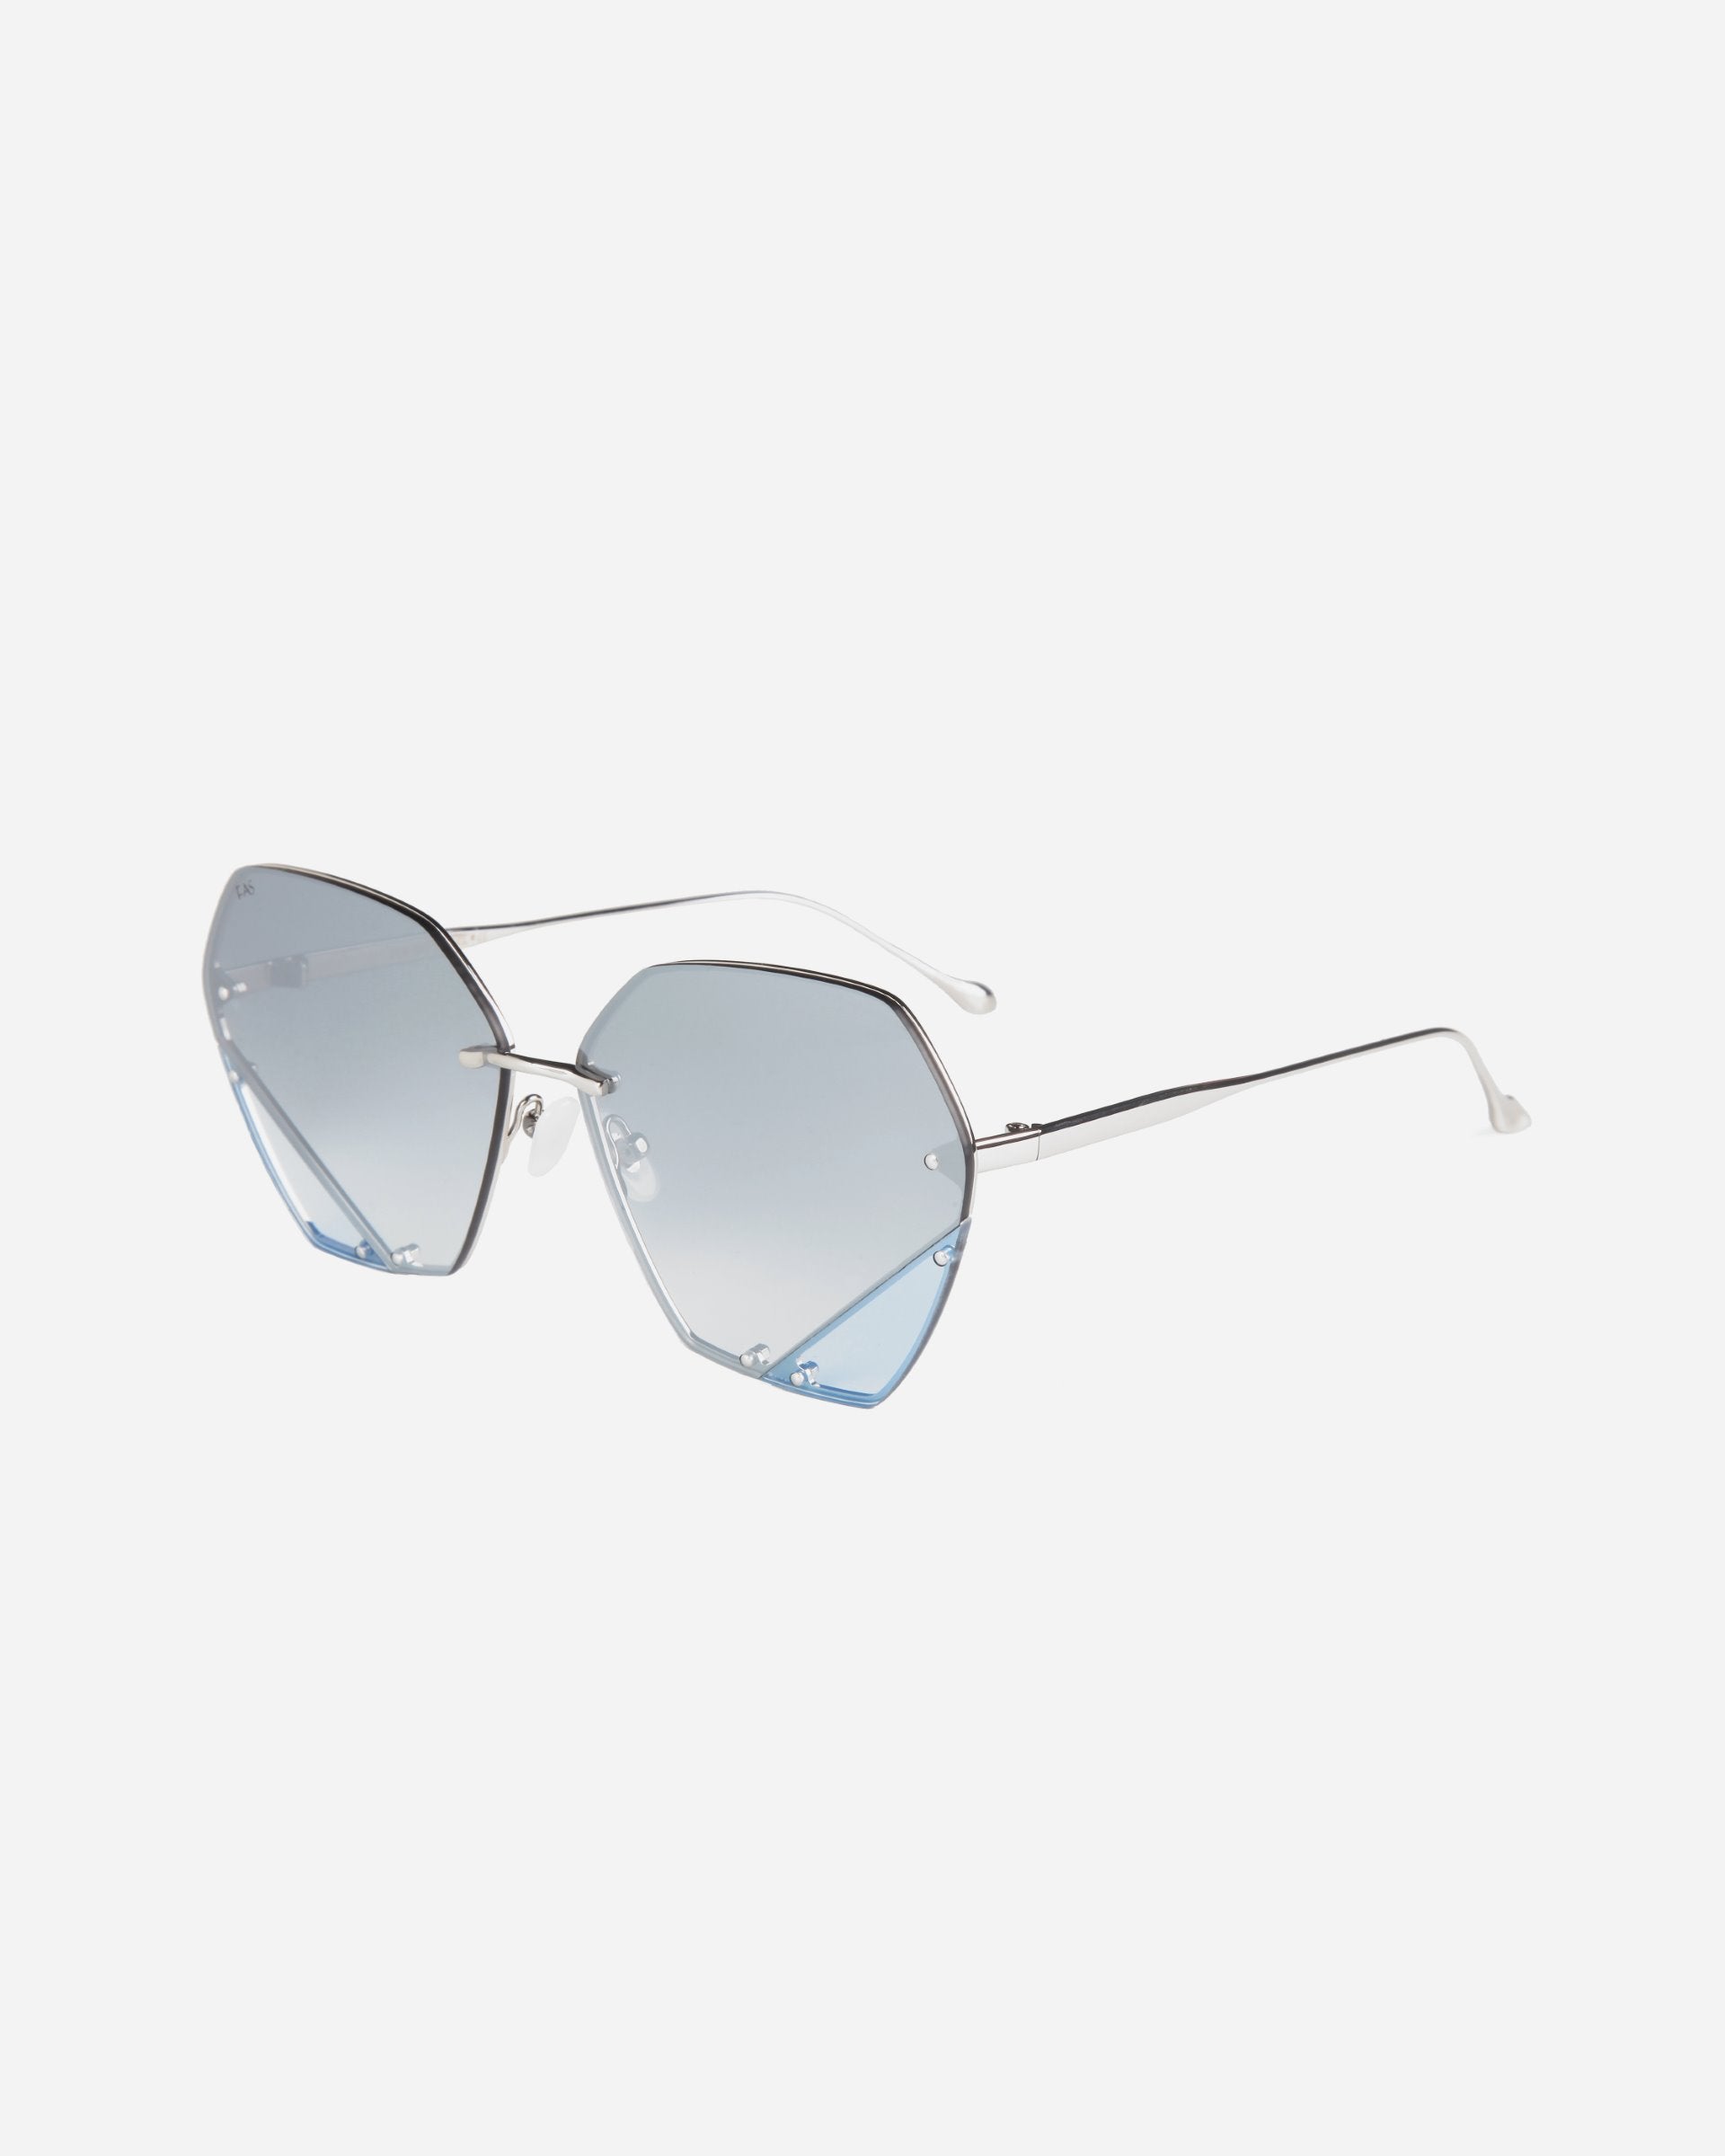 A pair of stylish sunglasses with hexagonal, gradient blue lenses and thin silver metal frames. Featuring jadestone nosepads for added comfort, the design is modern and minimalistic, providing a chic look - the Icy by For Art&#39;s Sake®.